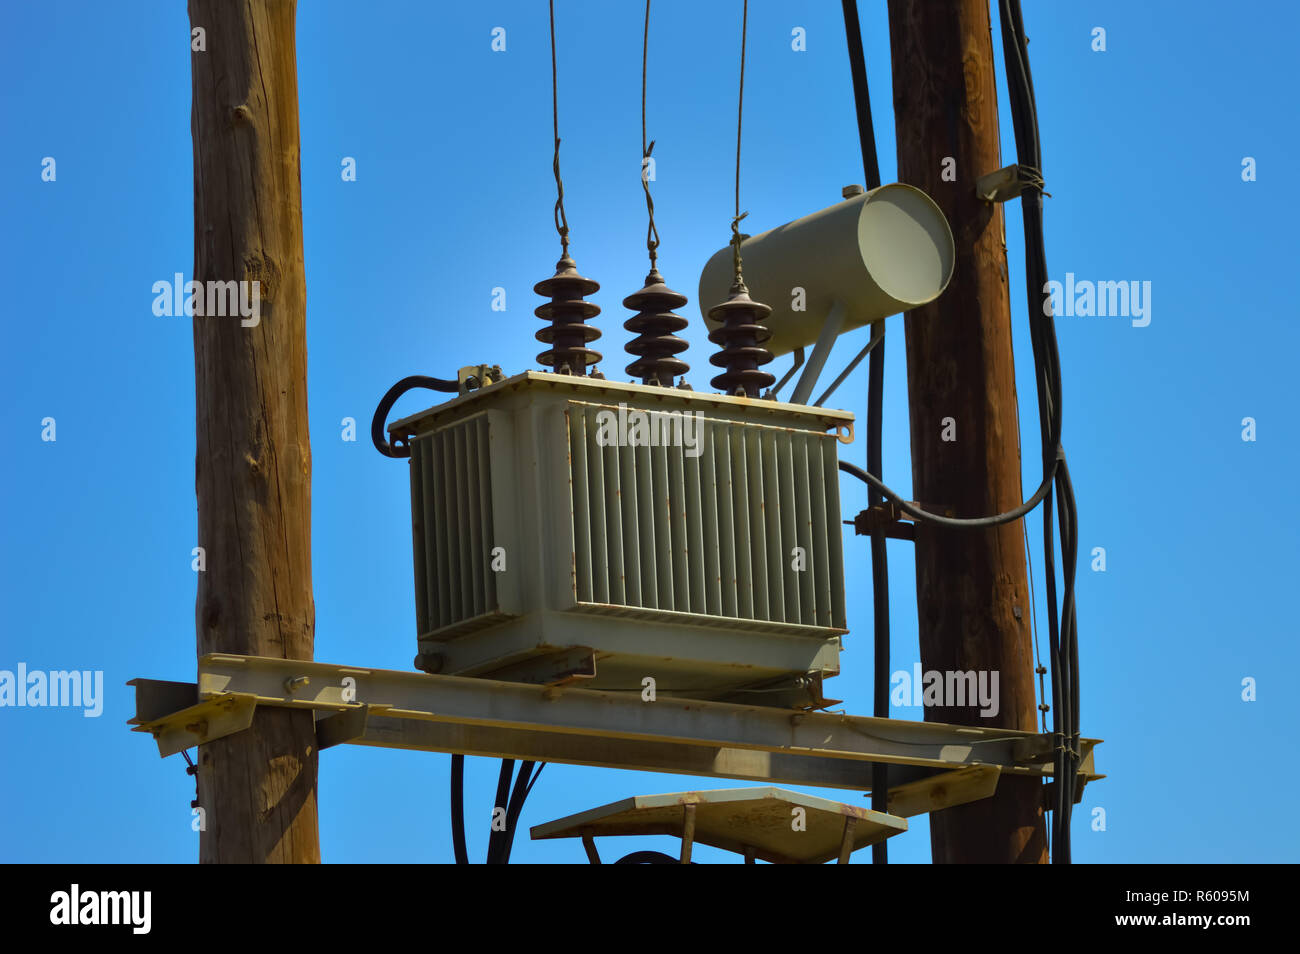 Electric transformer on wooden pylons Stock Photo